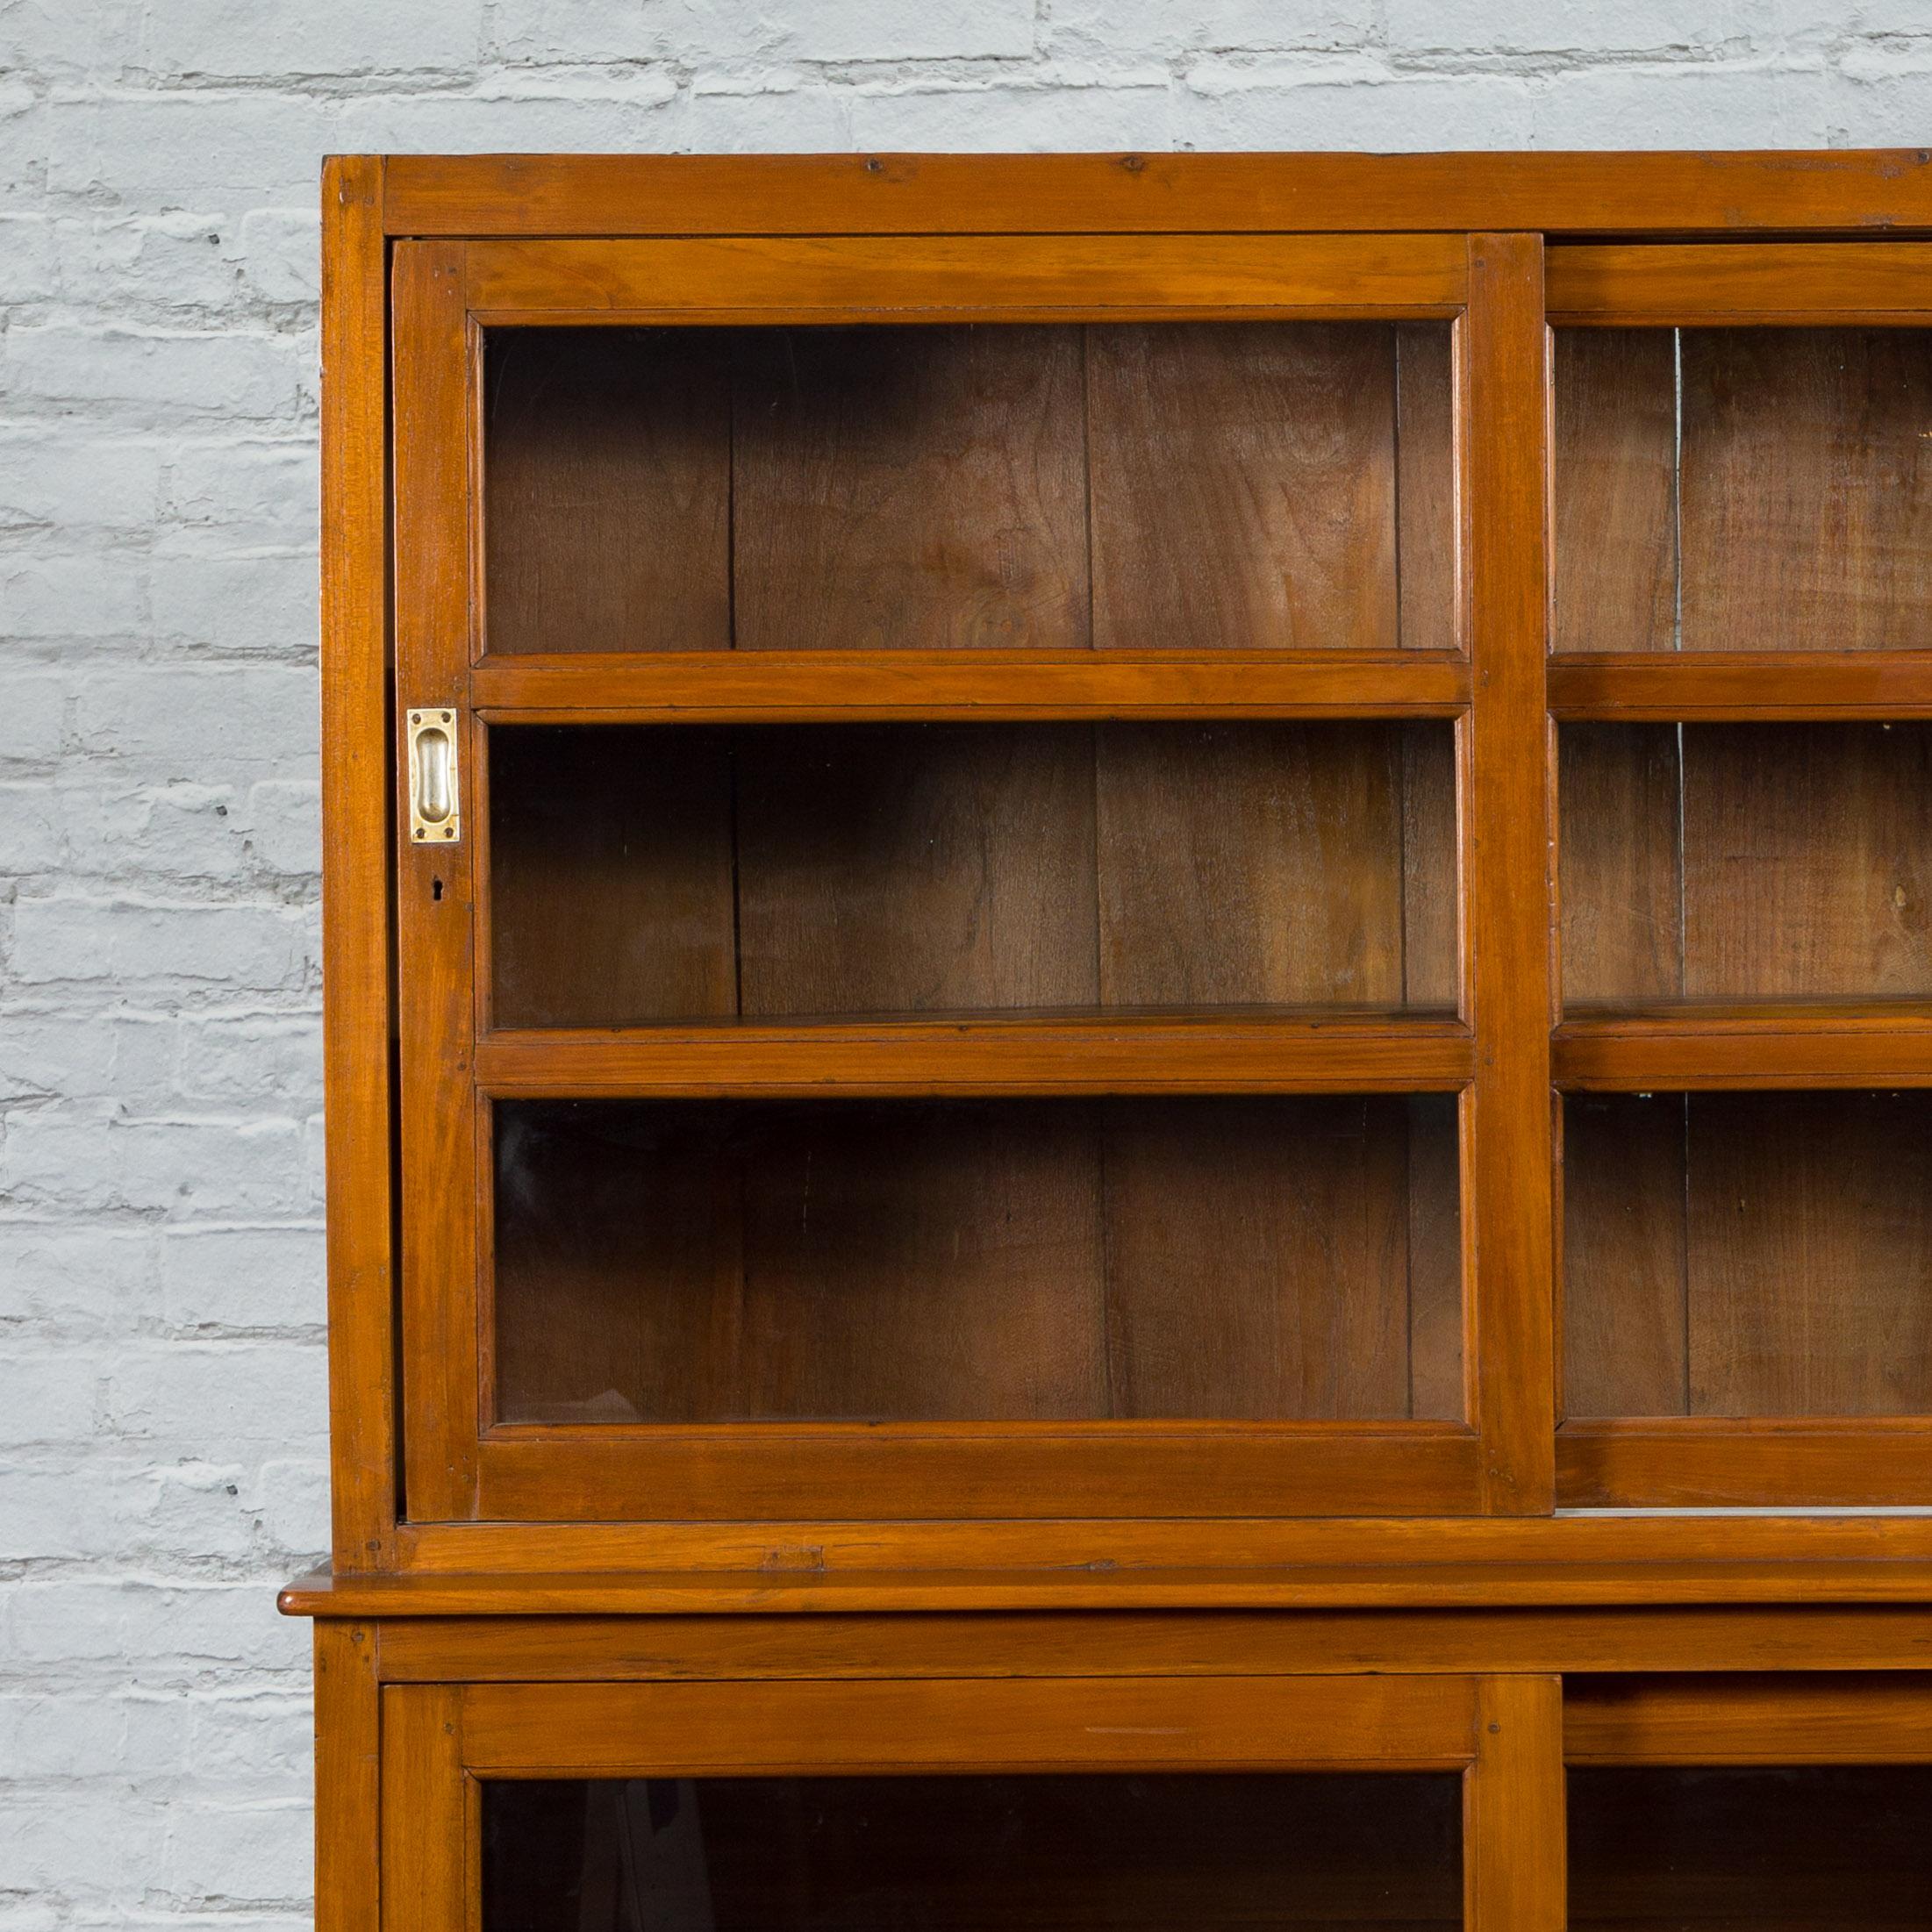 A vintage Indonesian Dutch Colonial style teak wood bookcase from the mid 20th century with sliding glass doors. Created in Indonesia during the Midcentury period, this teak (a very sturdy wood) bookcase features a linear silhouette perfectly